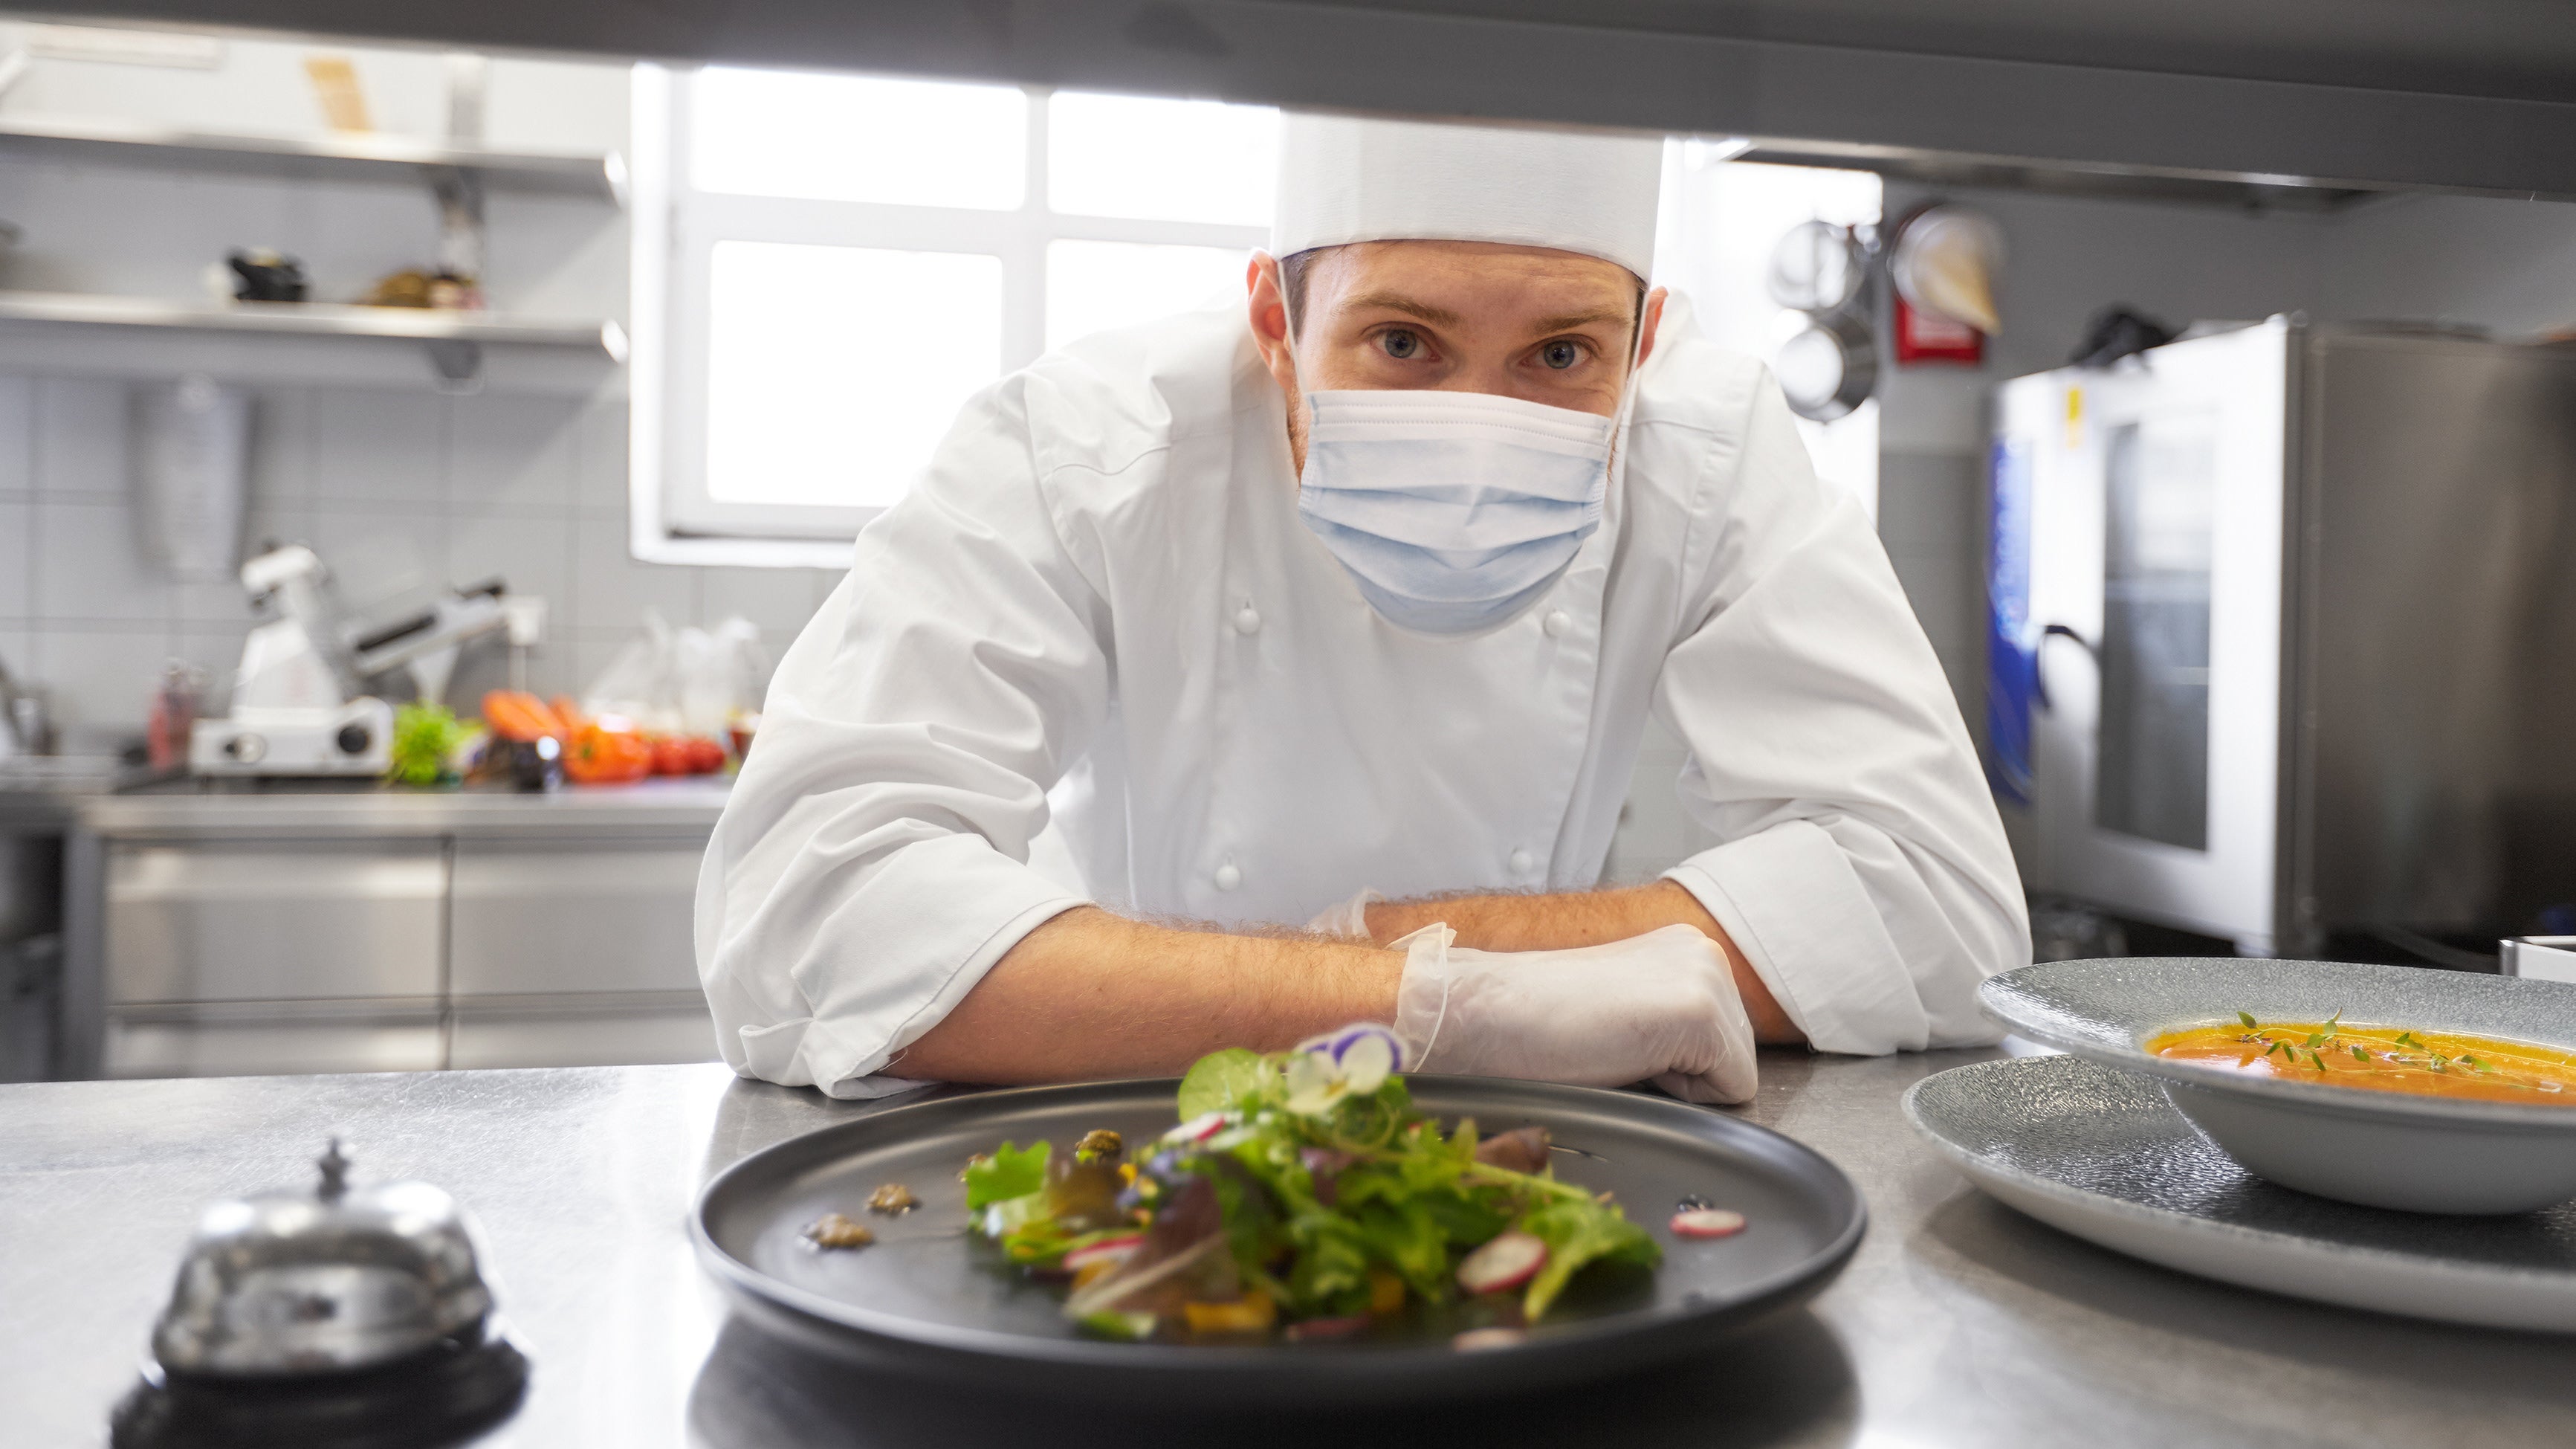 Take These Precautions Before Going To A Restaurant